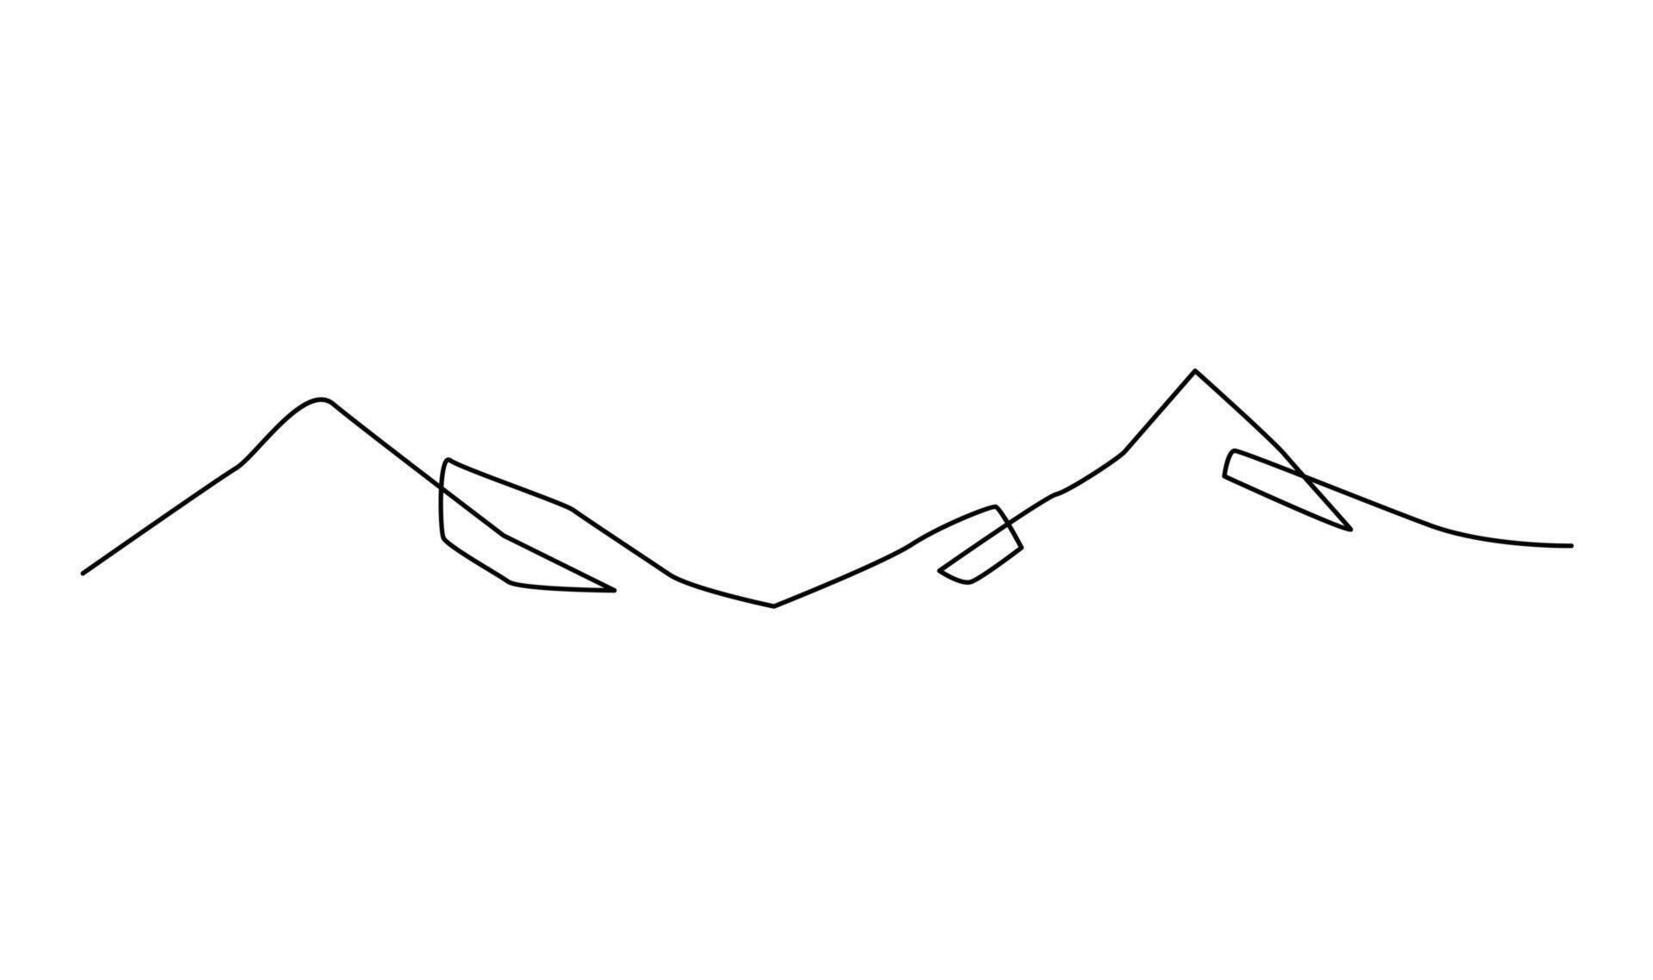 One continuous line drawing of mountain range landscape template vector